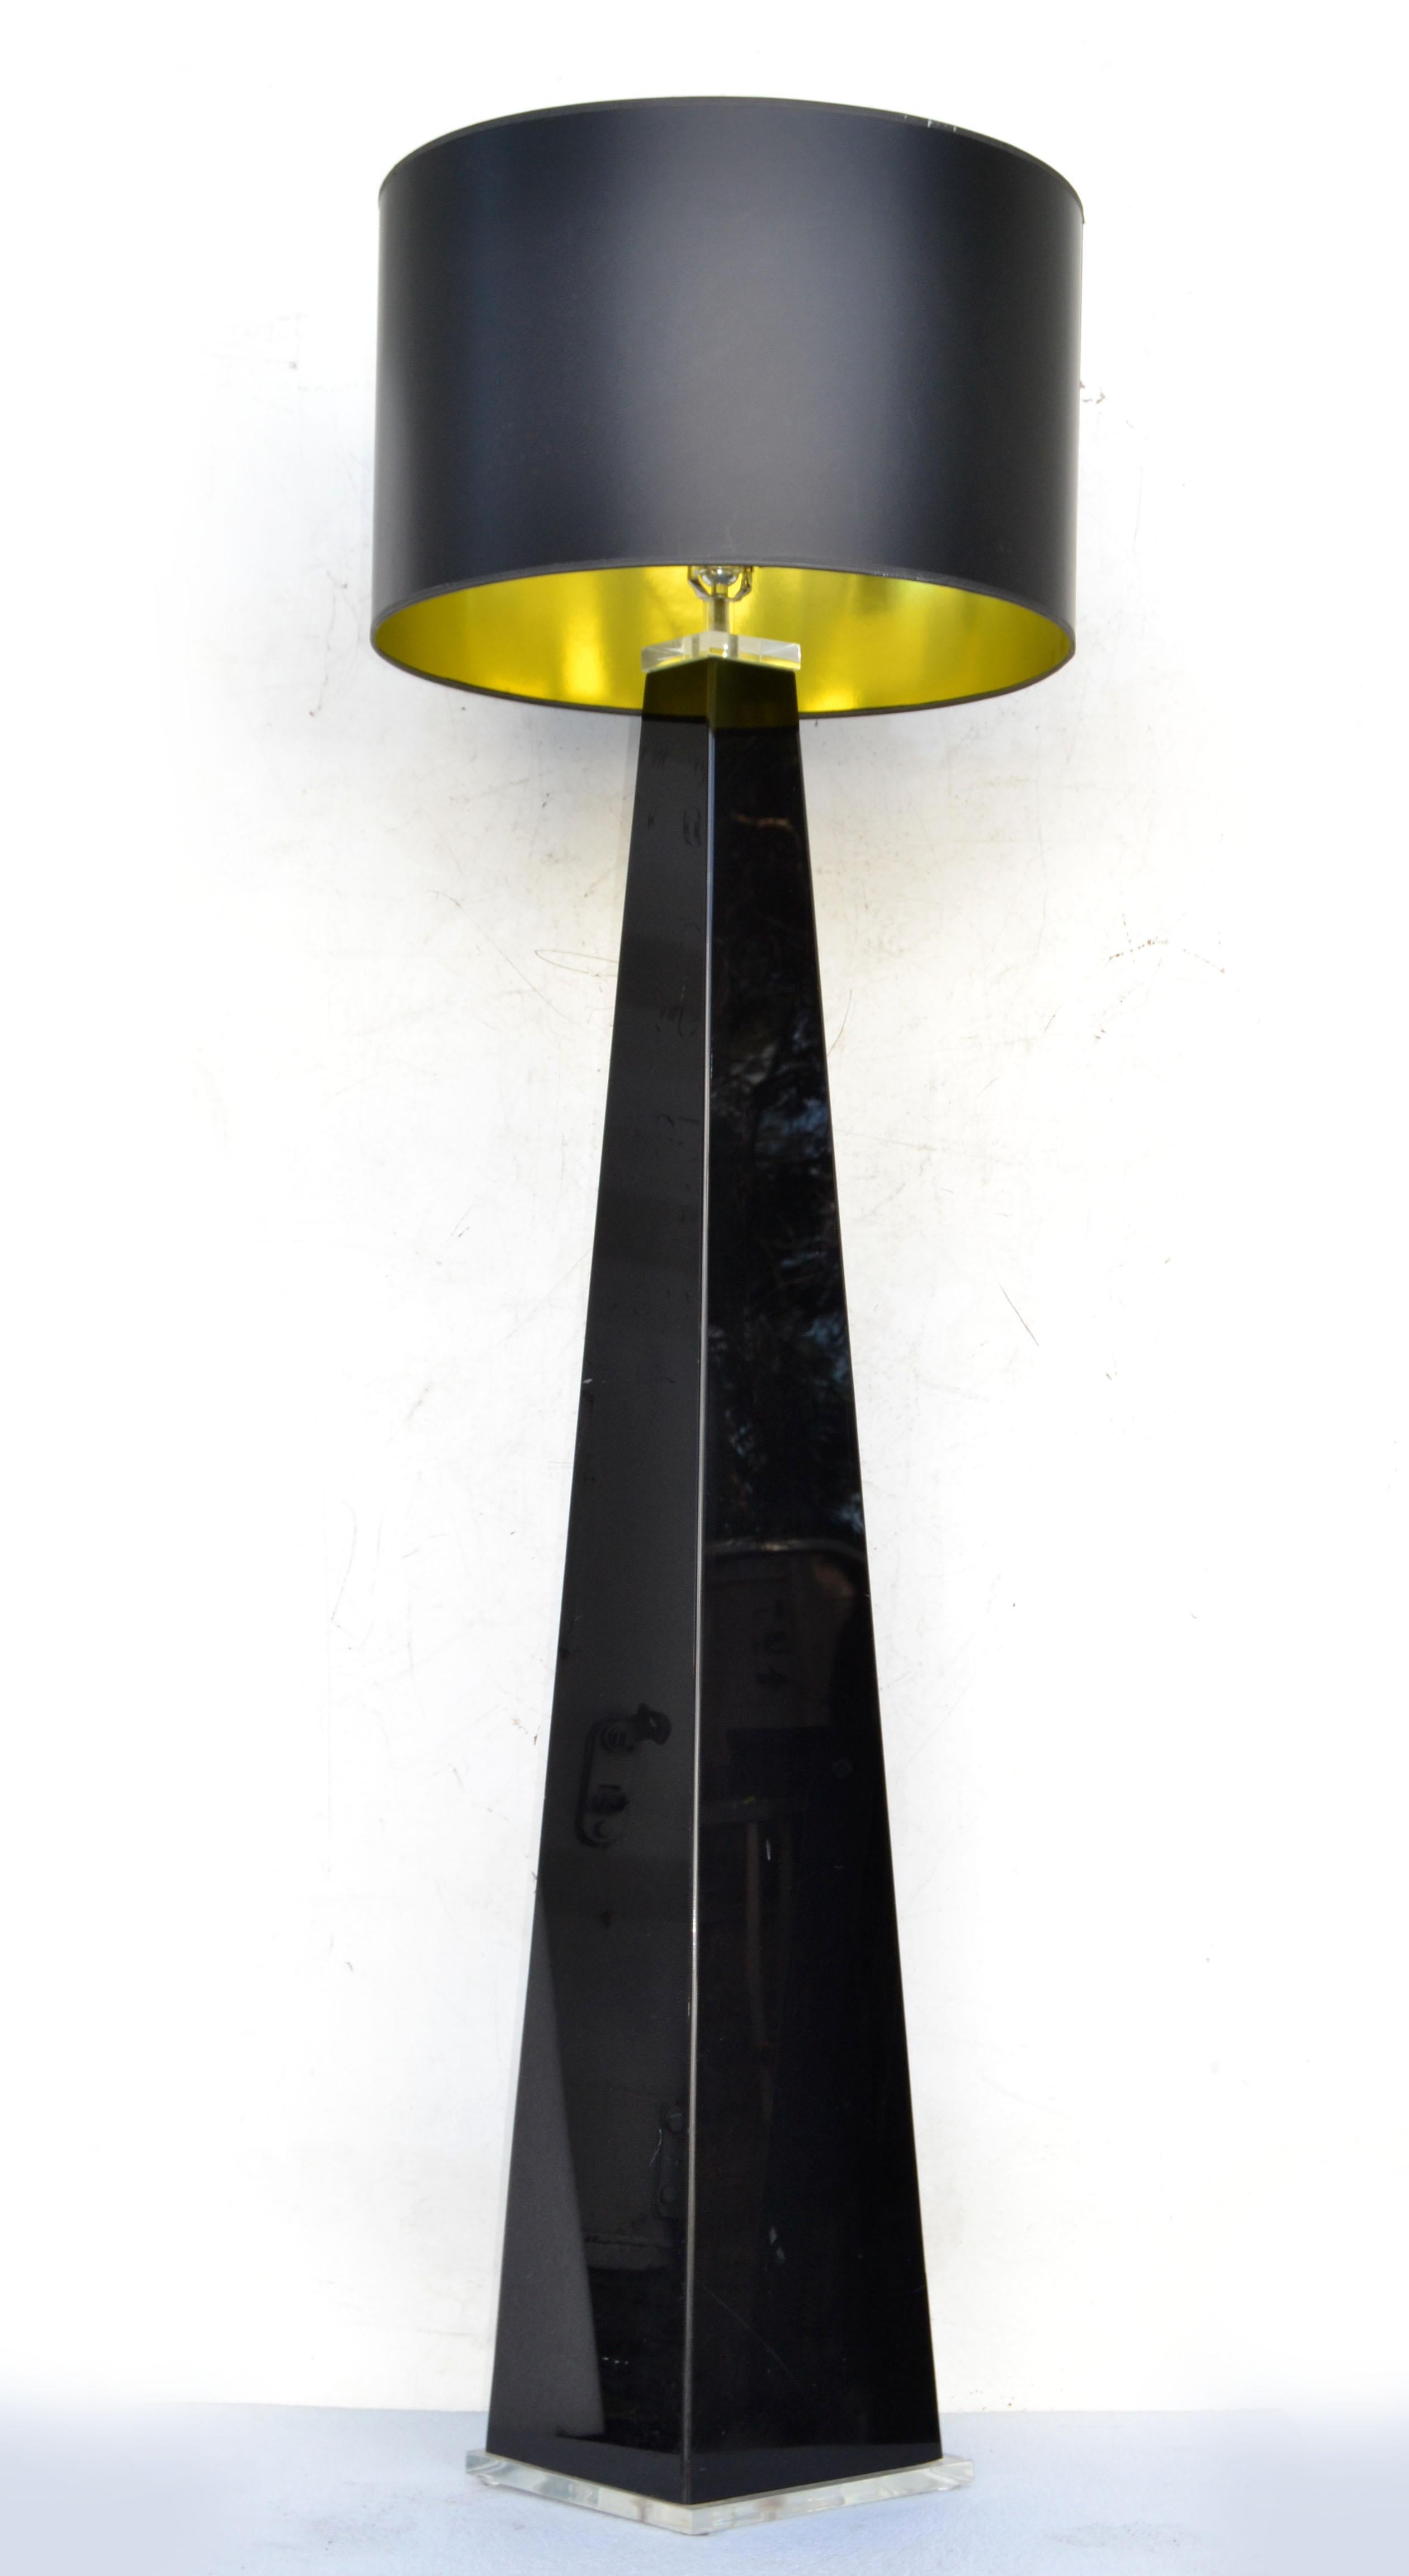 Tall black Lucite geometric pyramid shaped floor lamp with a clear square Base.
US wired and in working condition, takes a regular or LED bulb.
Transparent base measures: 11 x 11 inches.
Height to Top of socket: 62 inches.
No Shade:
Great size